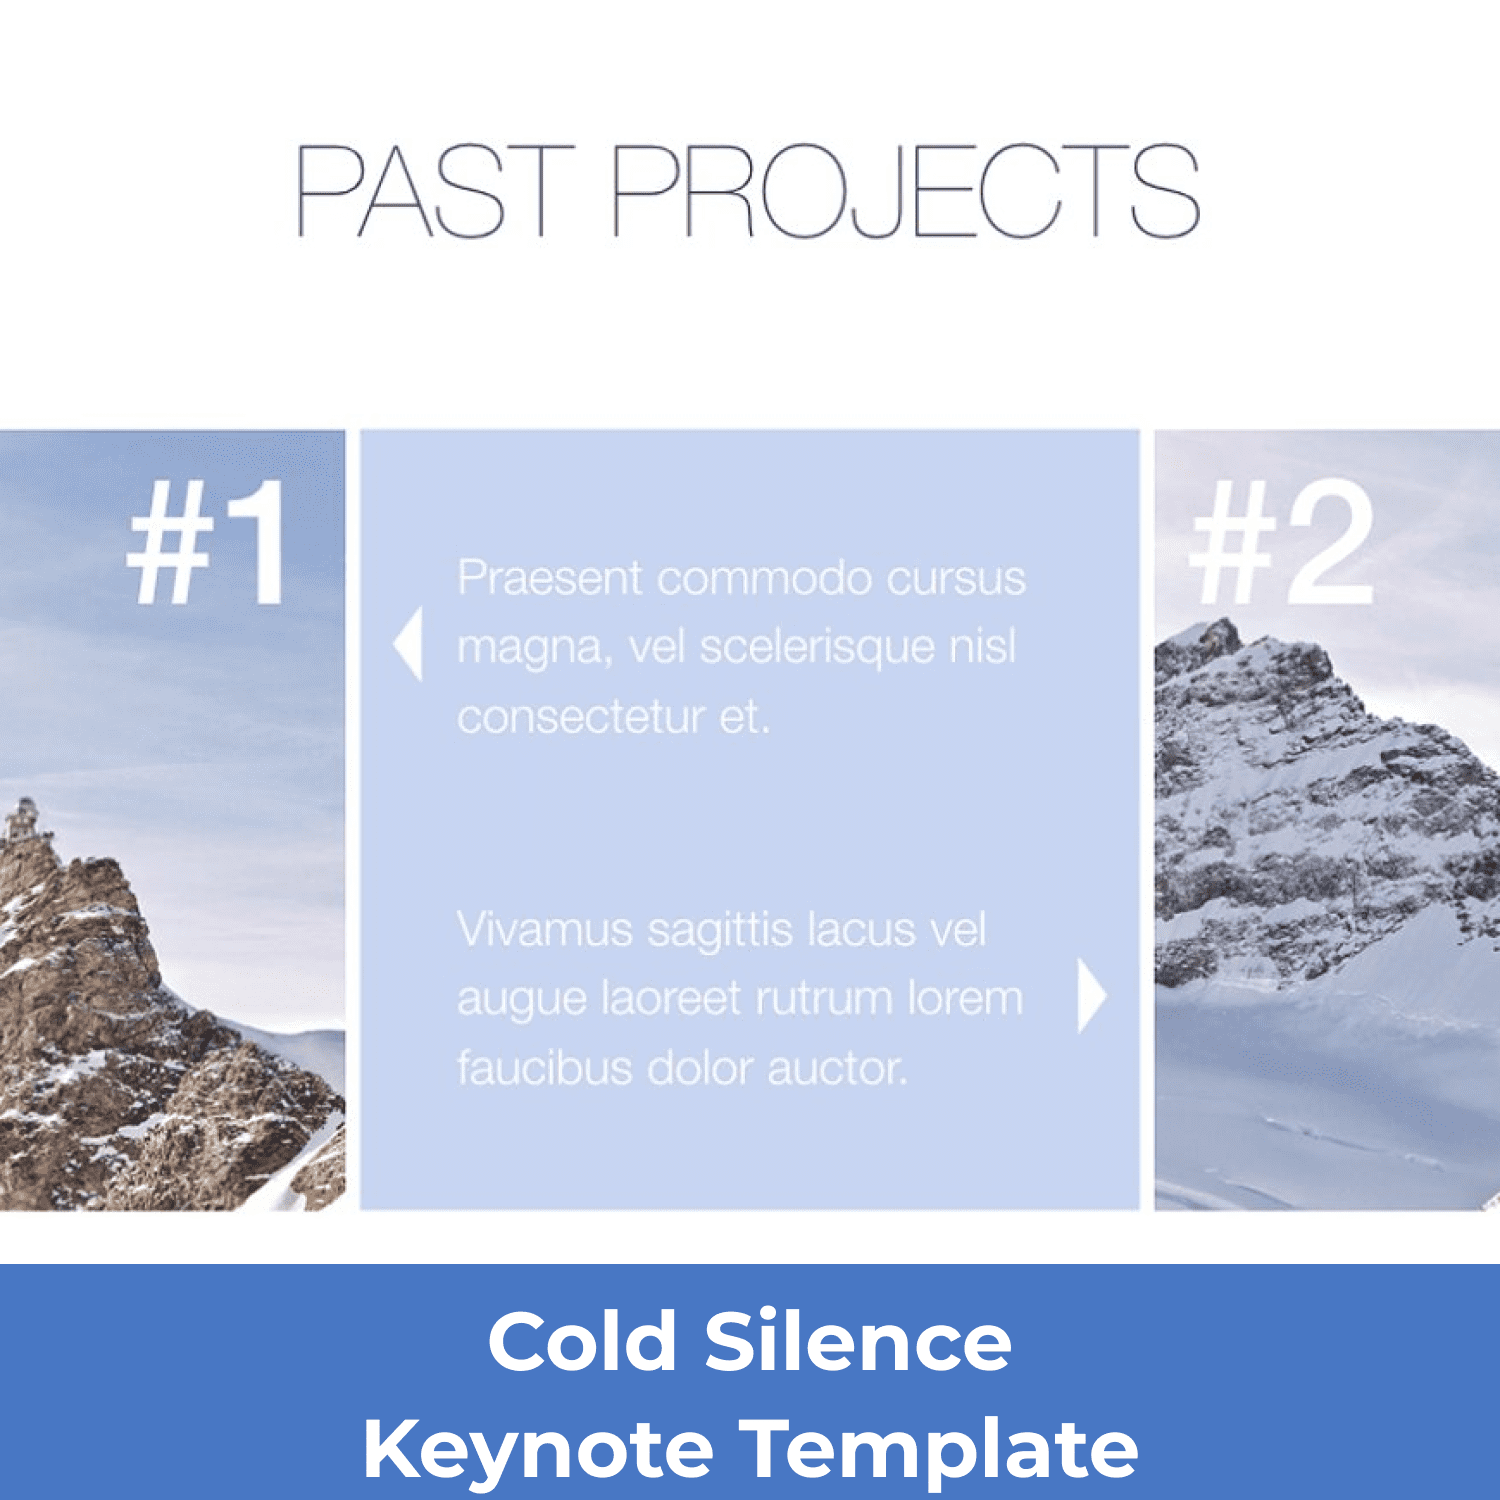 The Cold Silence template offers a professional look for your unique Keynote slideshows.